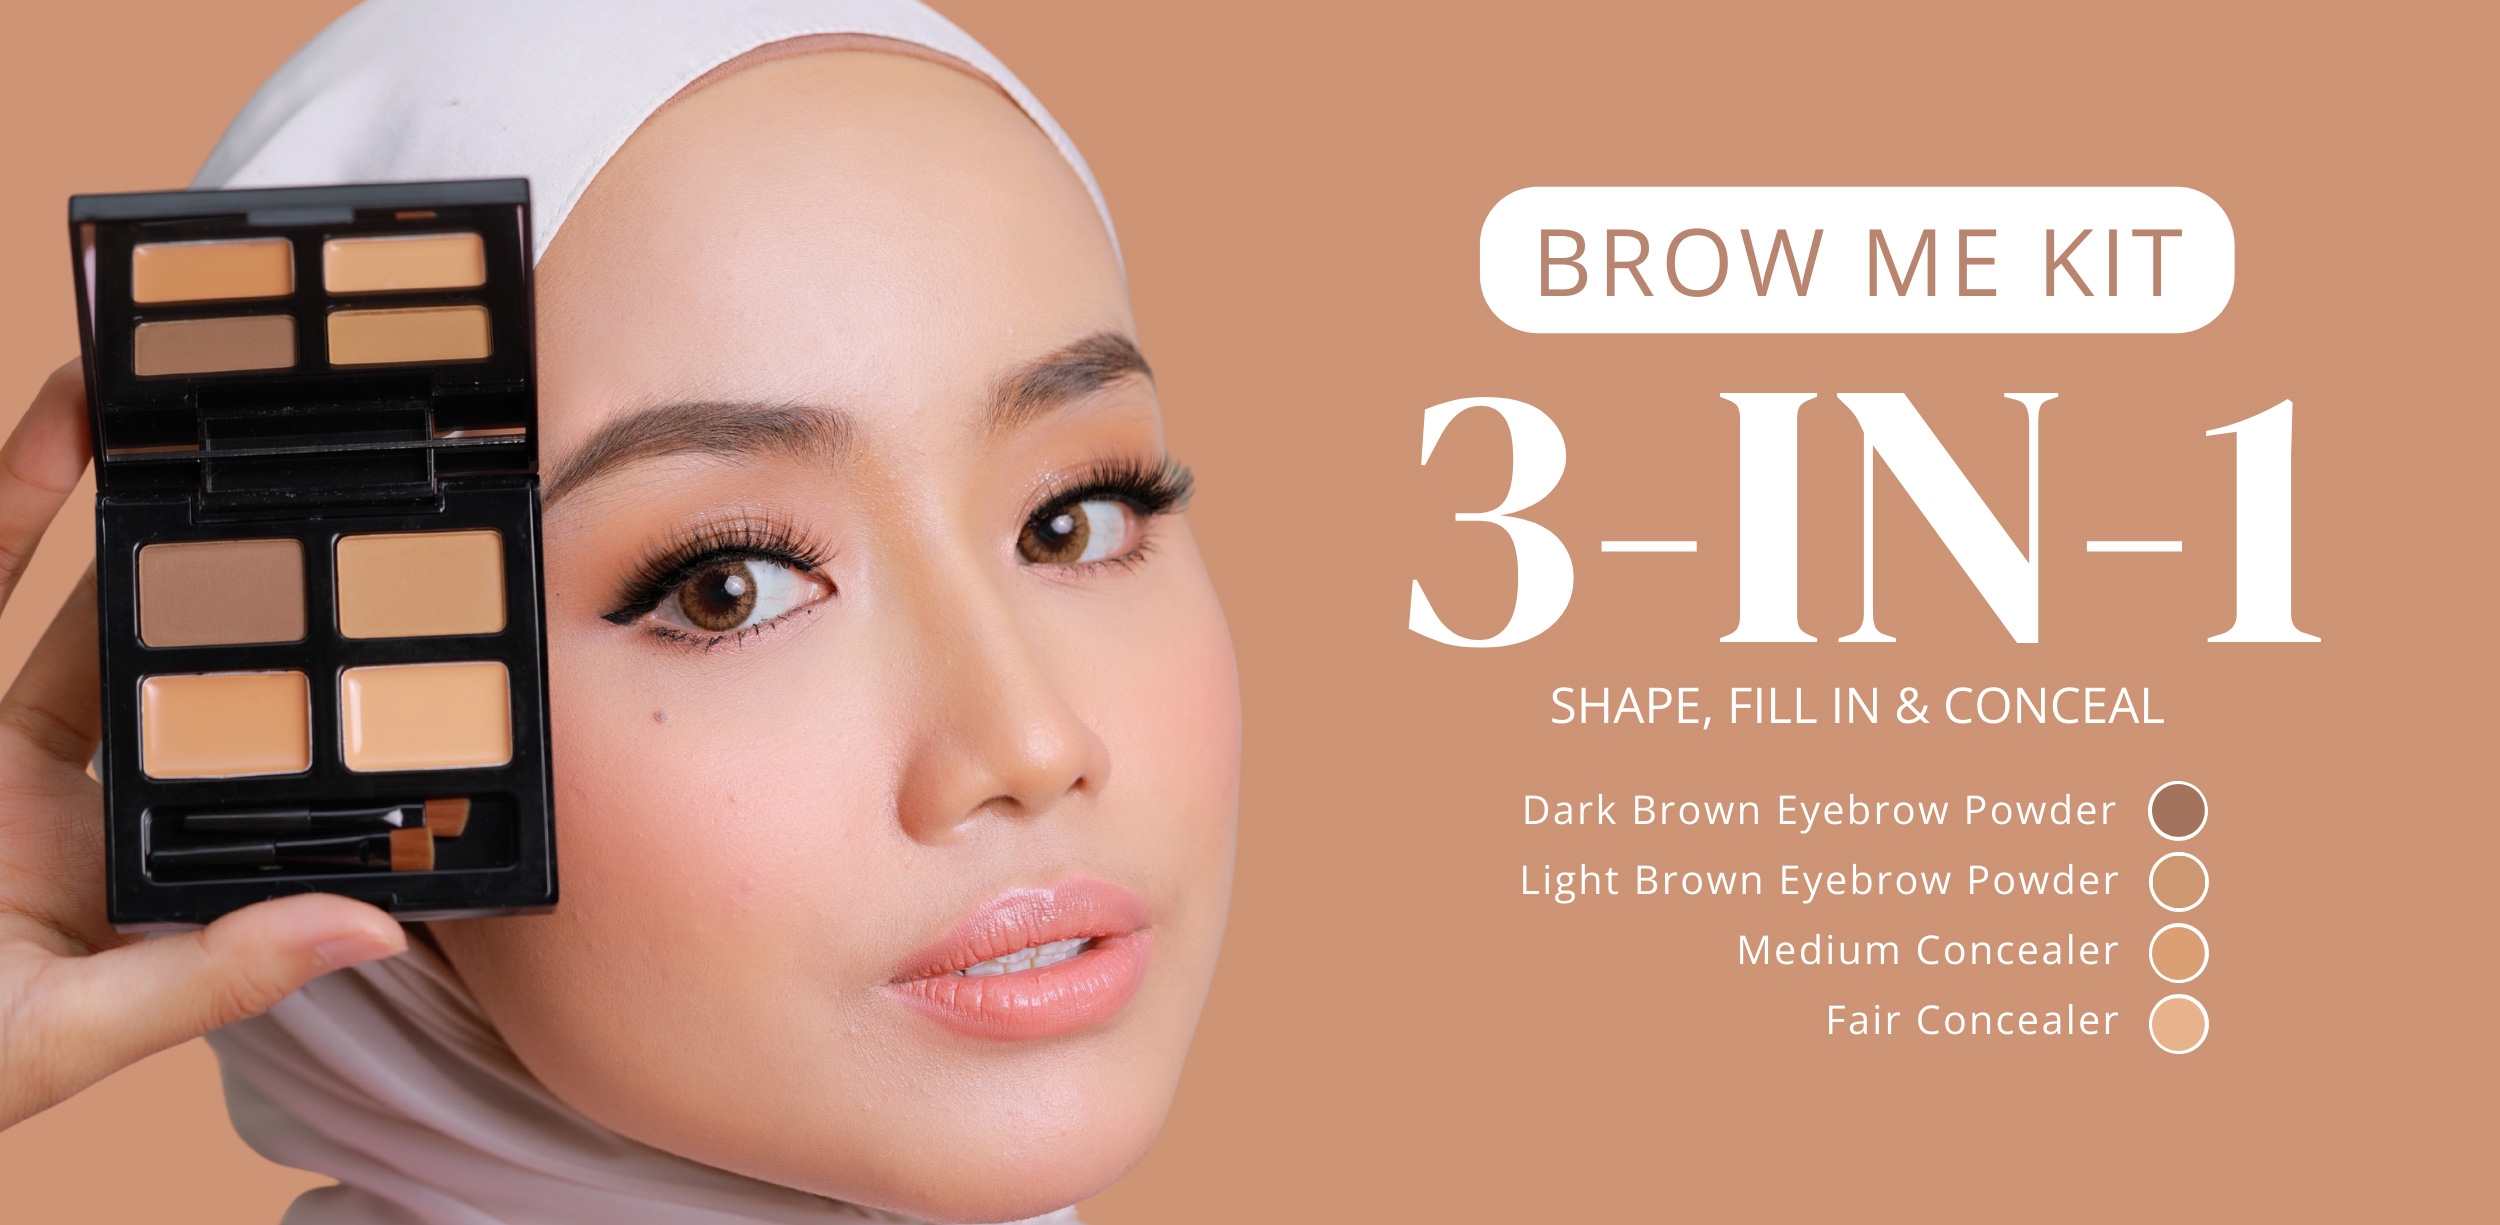 Brow Me Kit 3 in 1